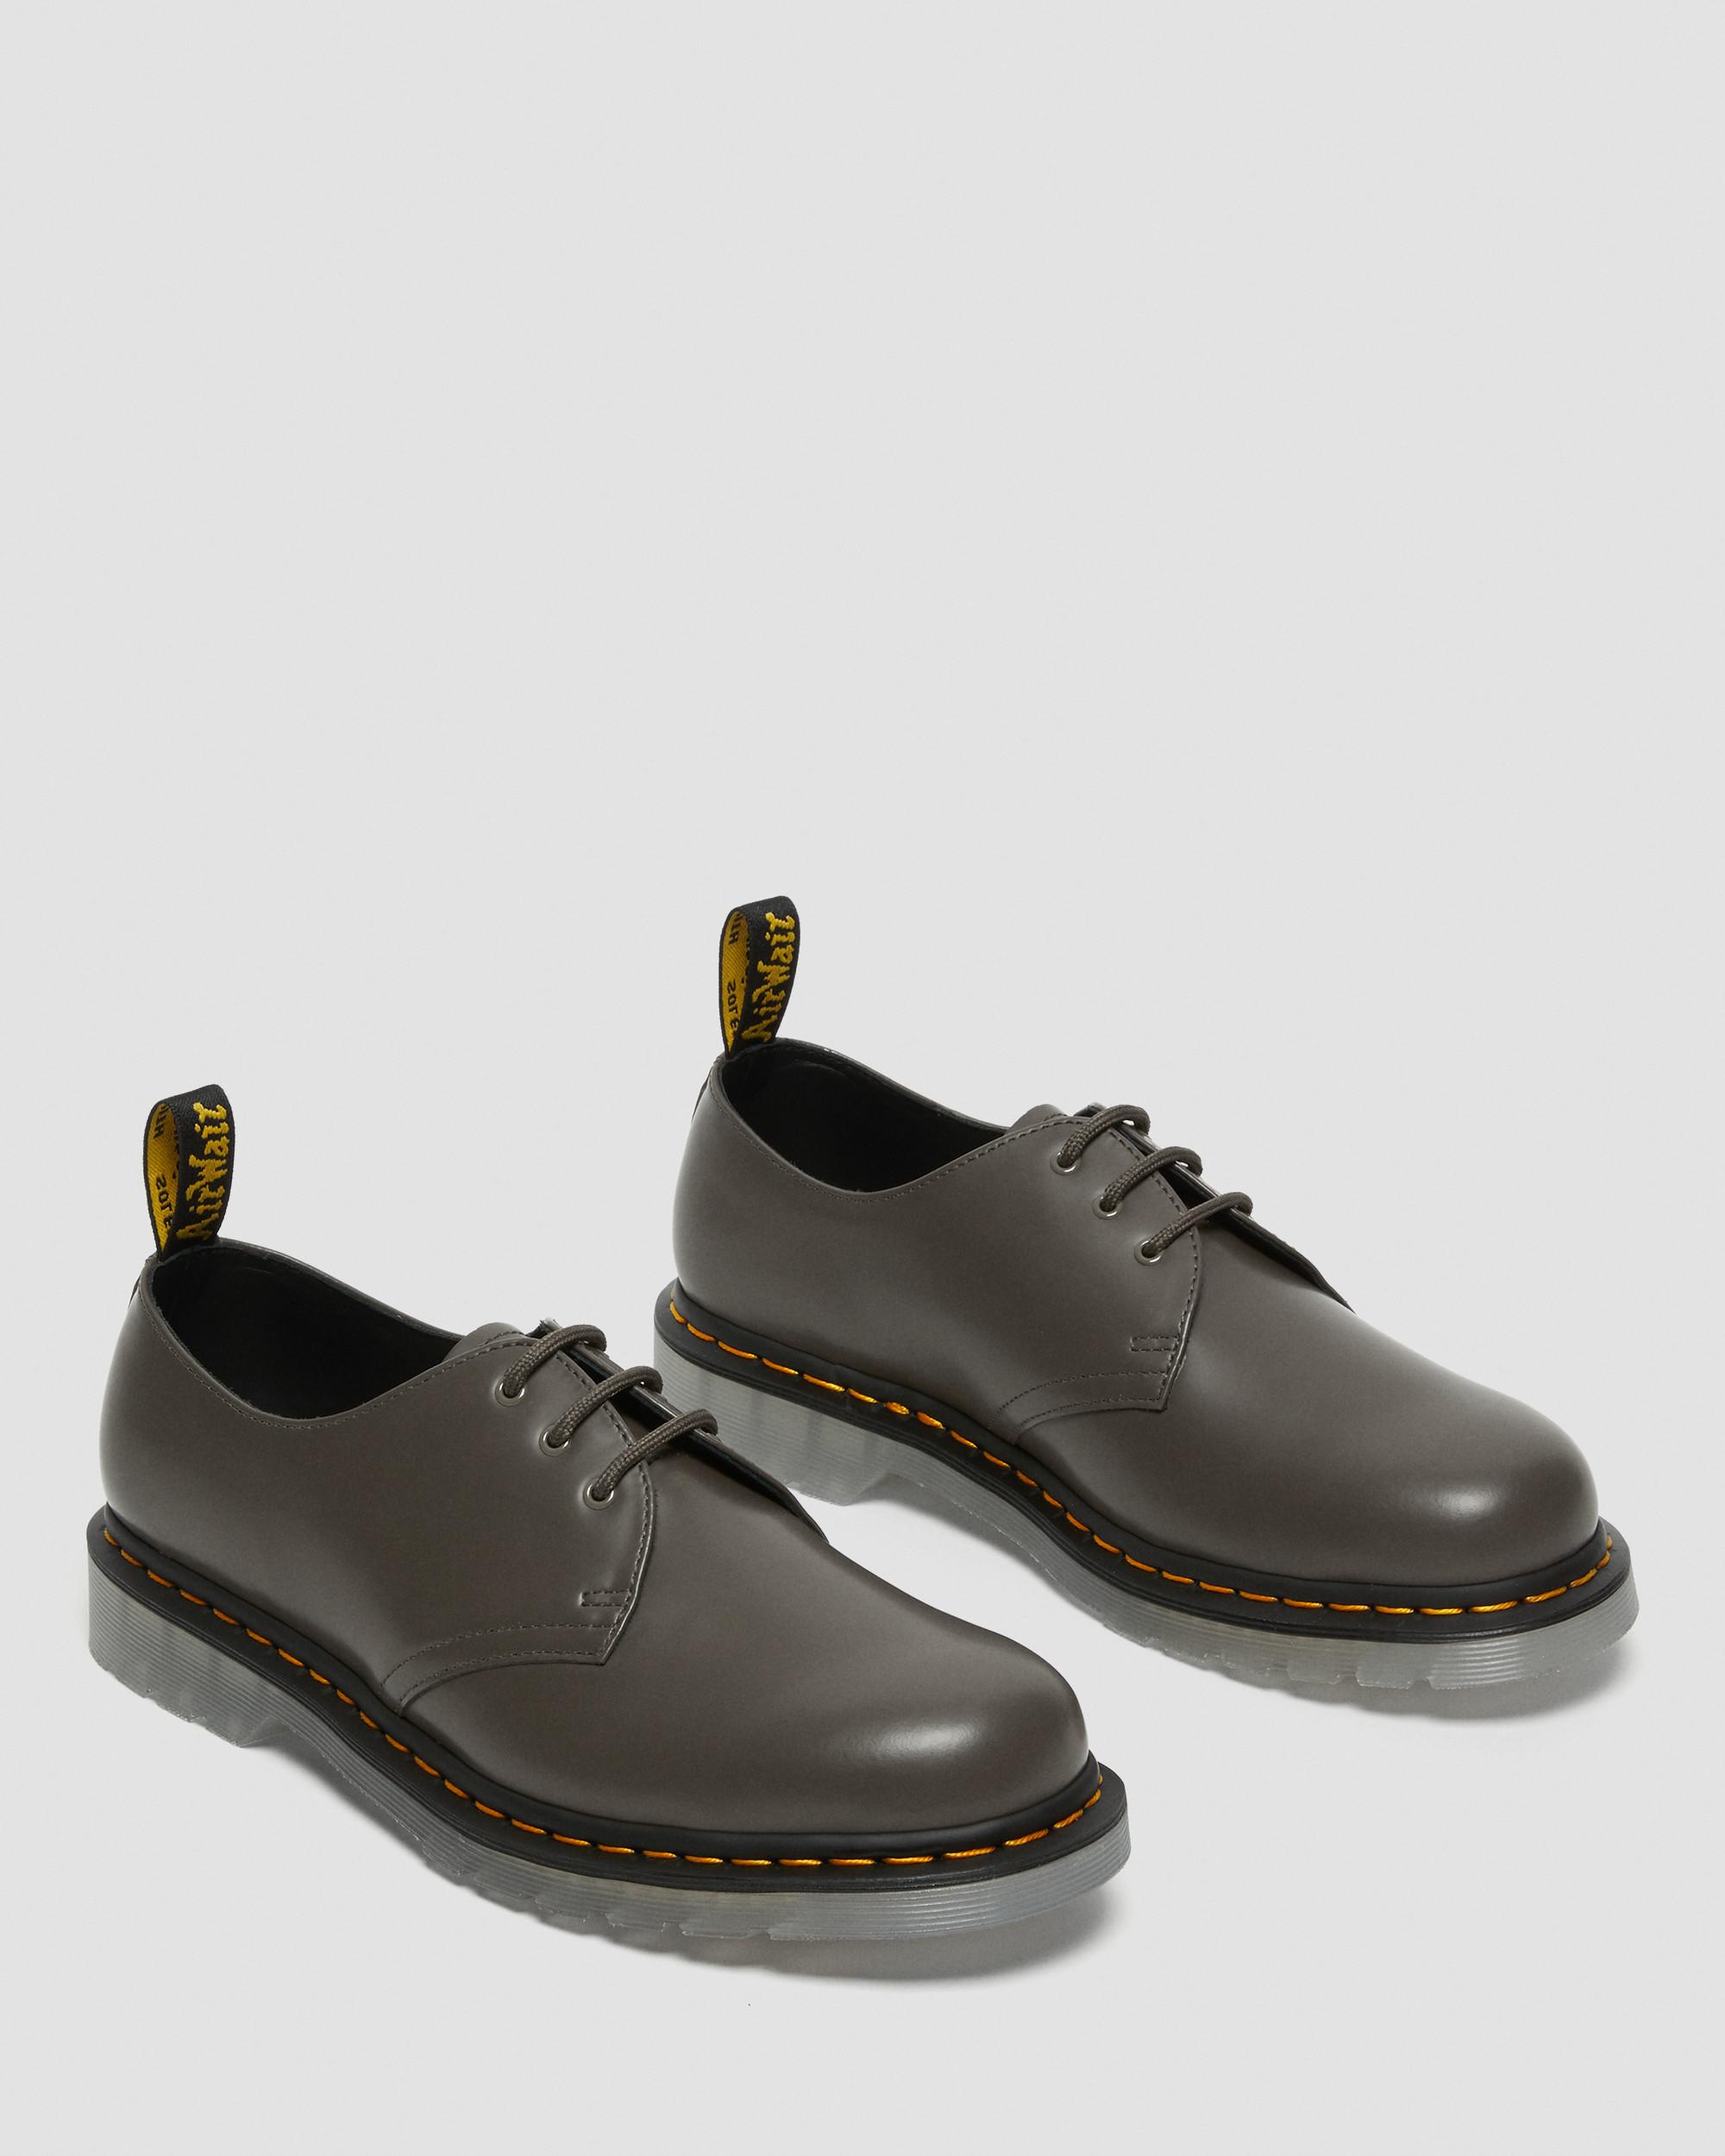 DR MARTENS 1461 Iced Smooth Leather Oxford Shoes